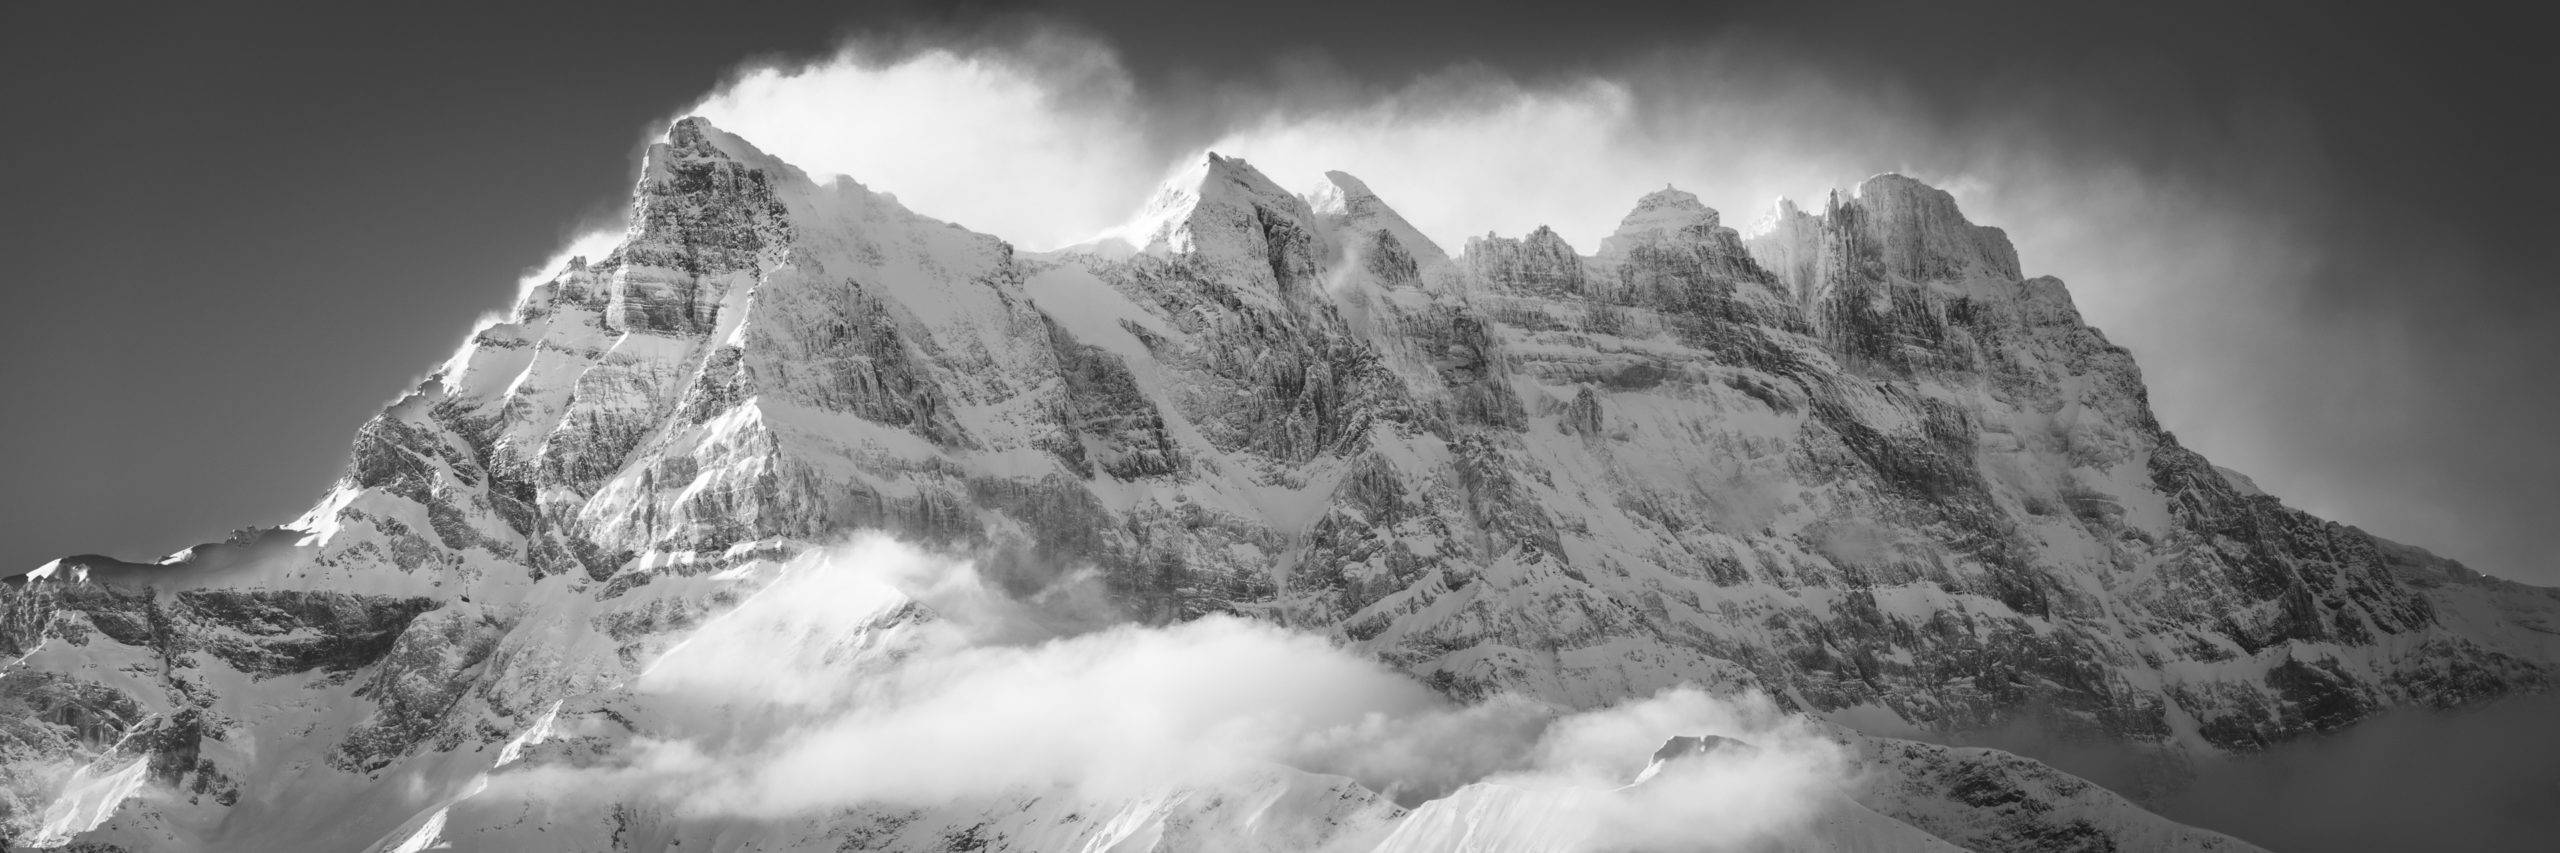 black and white mountain  Panorama of snow-capped Dent Blanche during a sunrise over this massif of the Alps in Switzerland